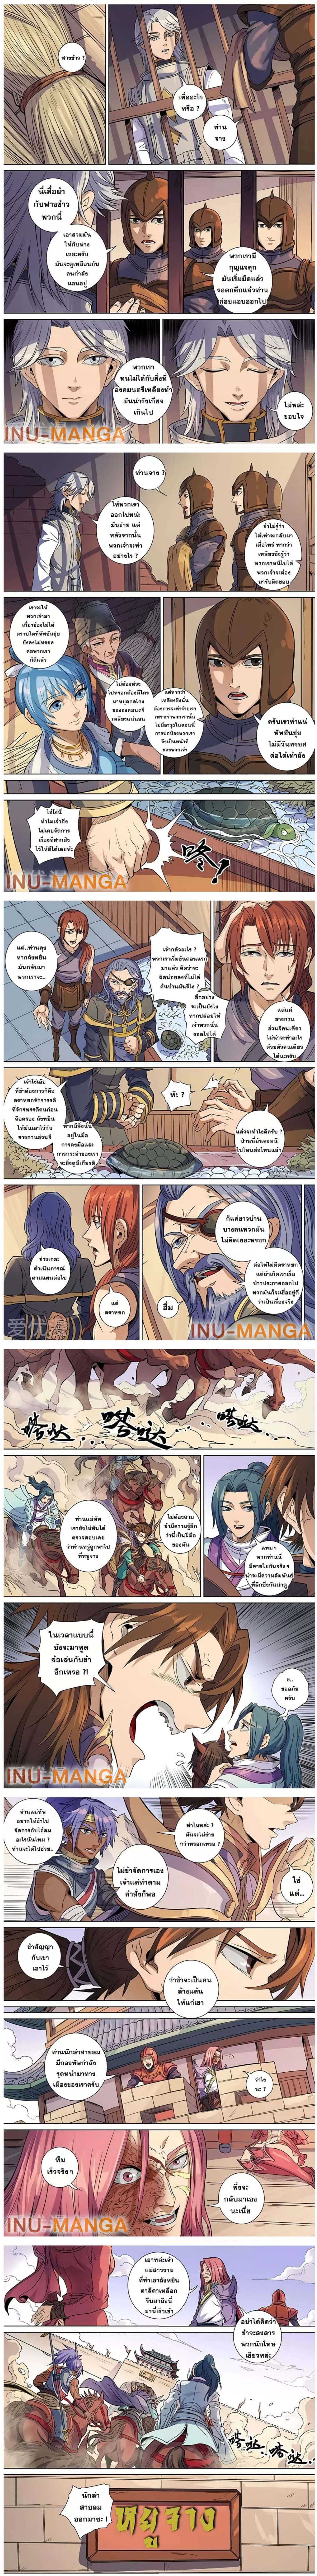 Tangyan in The Other World 138 (4)